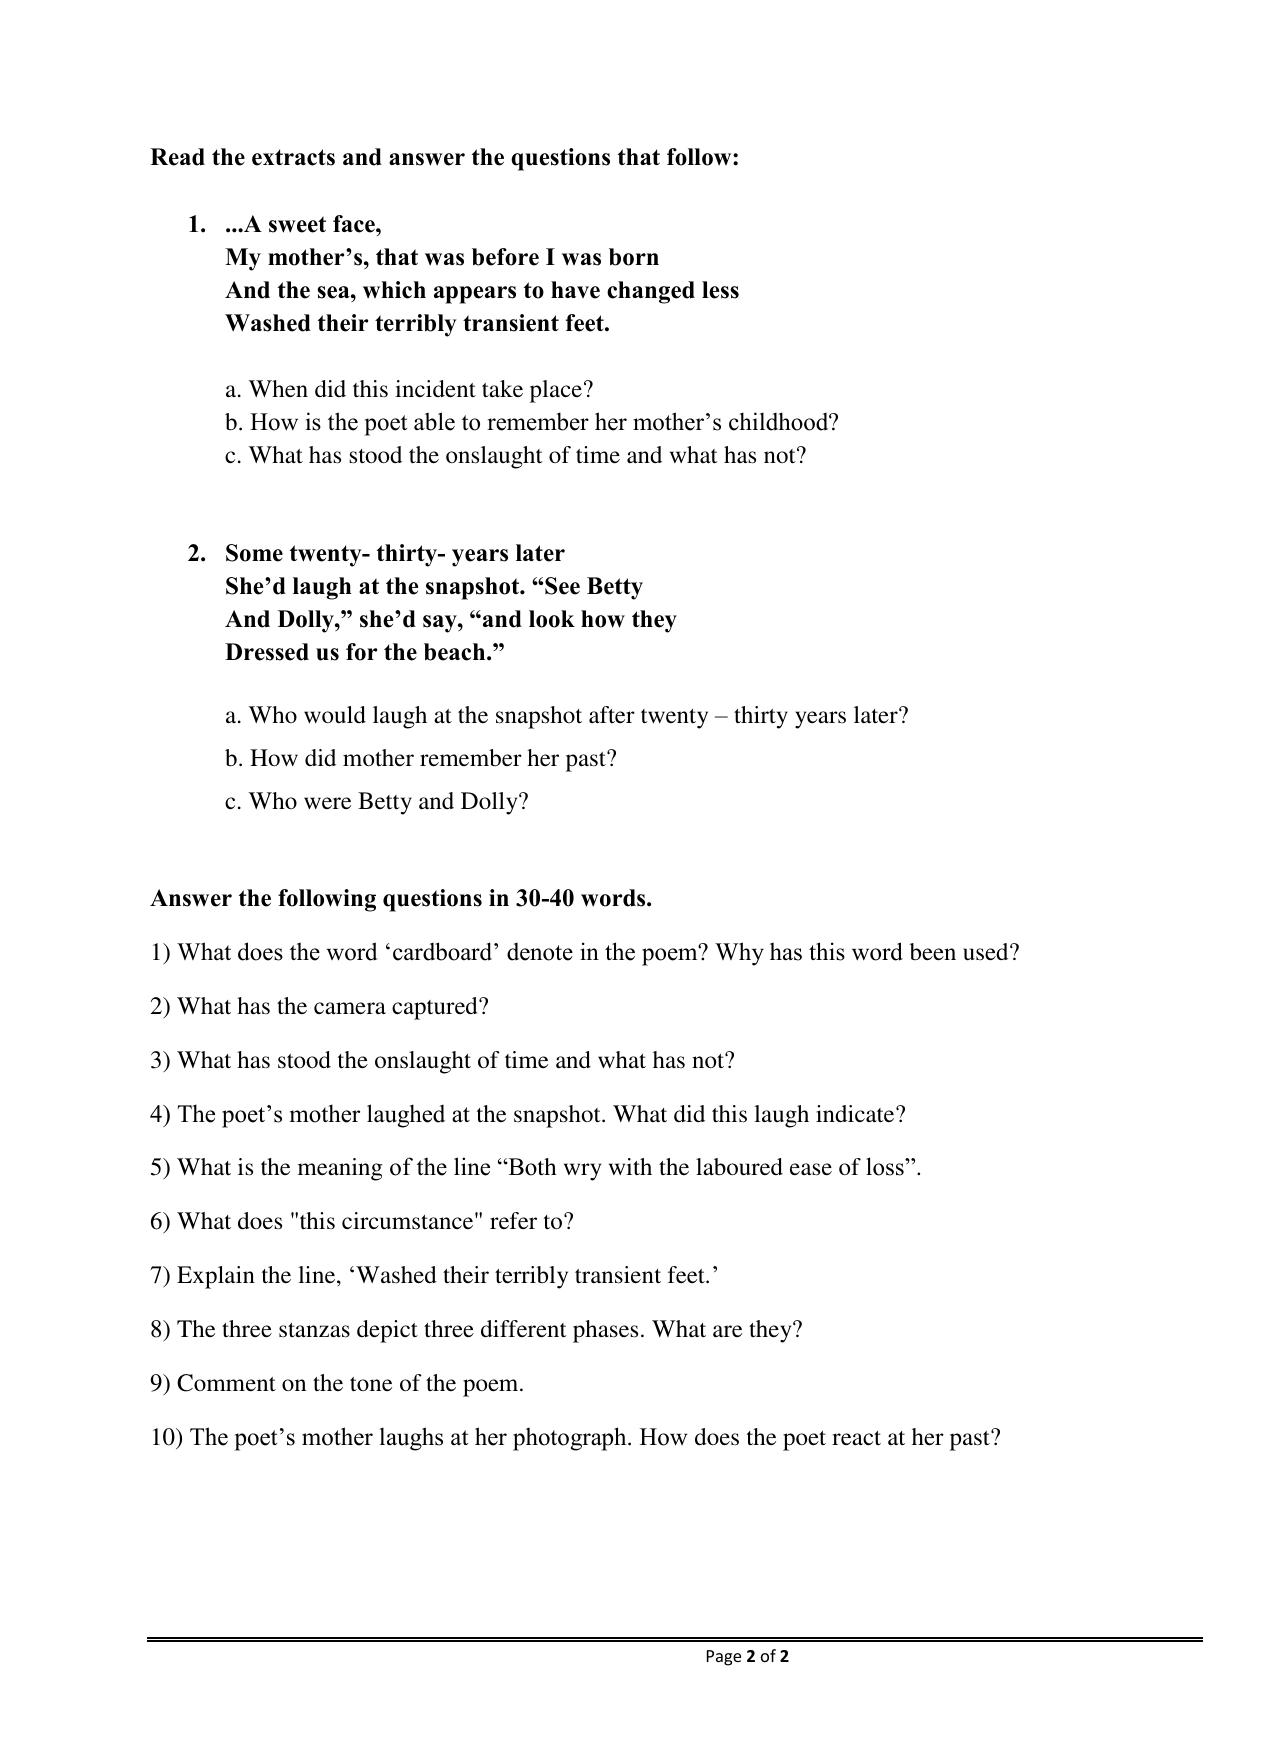 CBSE Worksheets for Class 11 English A Photograph Shirley Toulson Assignment - Page 2